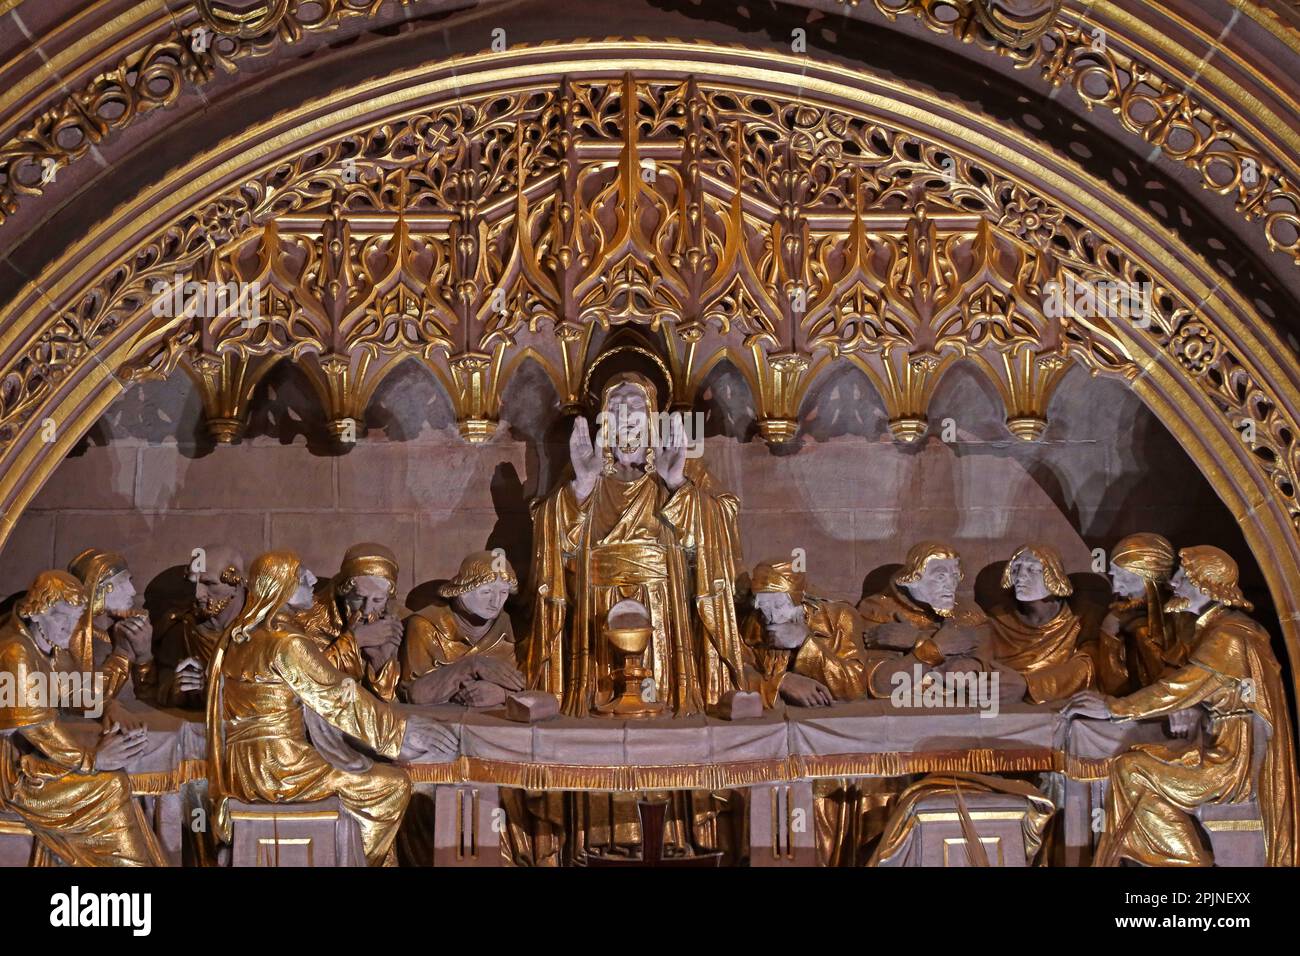 Last supper frieze, on high altar at Anglican Cathedral, St James' Mount, Liverpool , Merseyside, England, UK, L1 7AZ Stock Photo